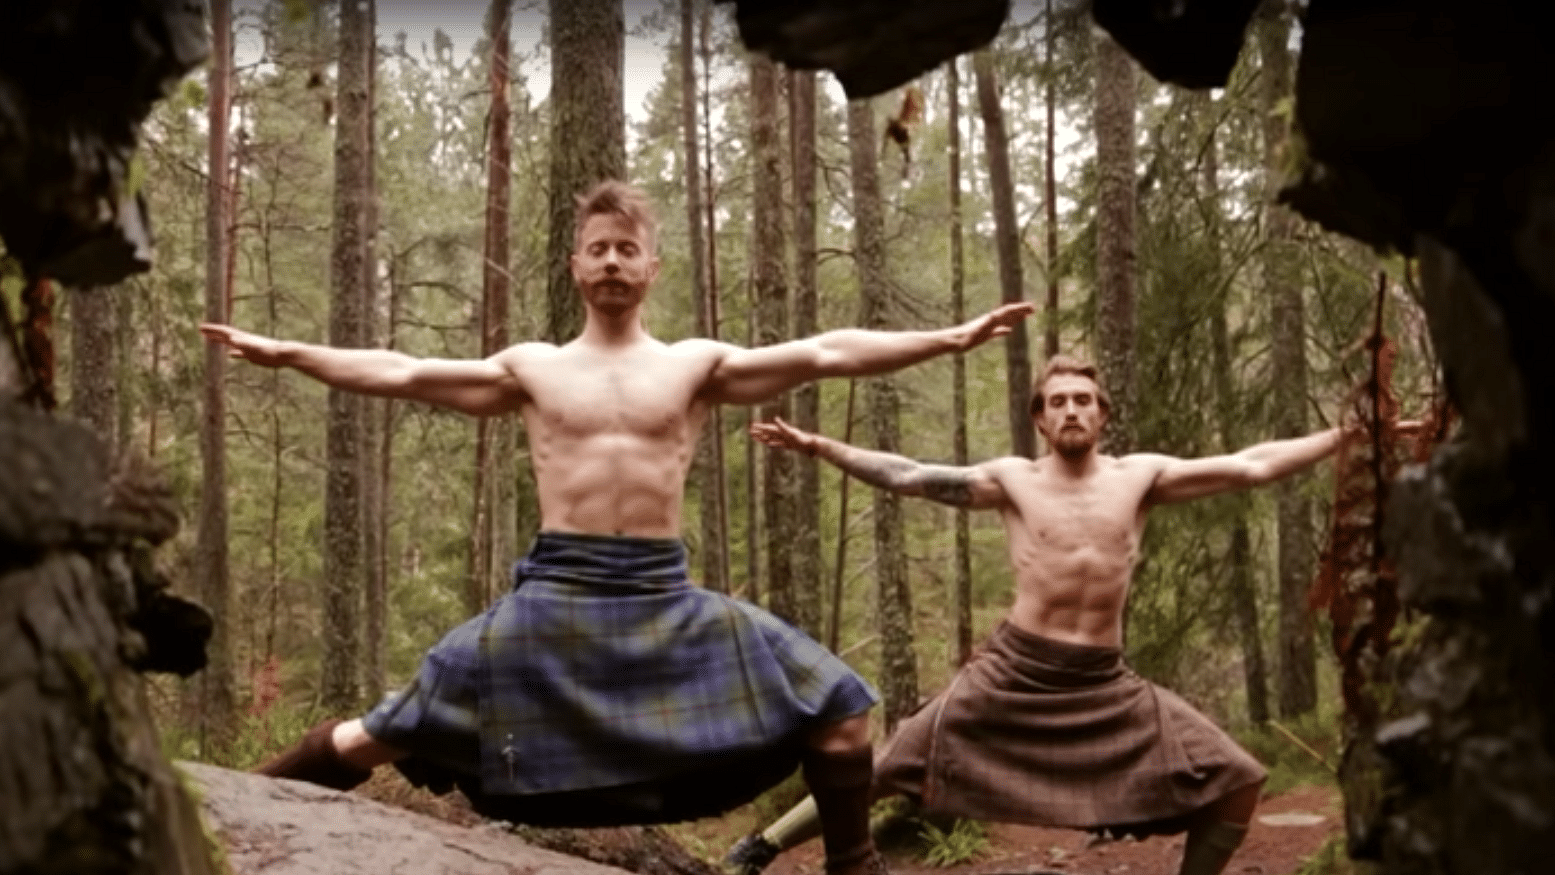 

Finlay and his student practice forest yoga in kilts. (Photo Courtesy: Youtube/<a href="https://www.youtube.com/watch?v=rKIGystgThc">BBC Social</a>)